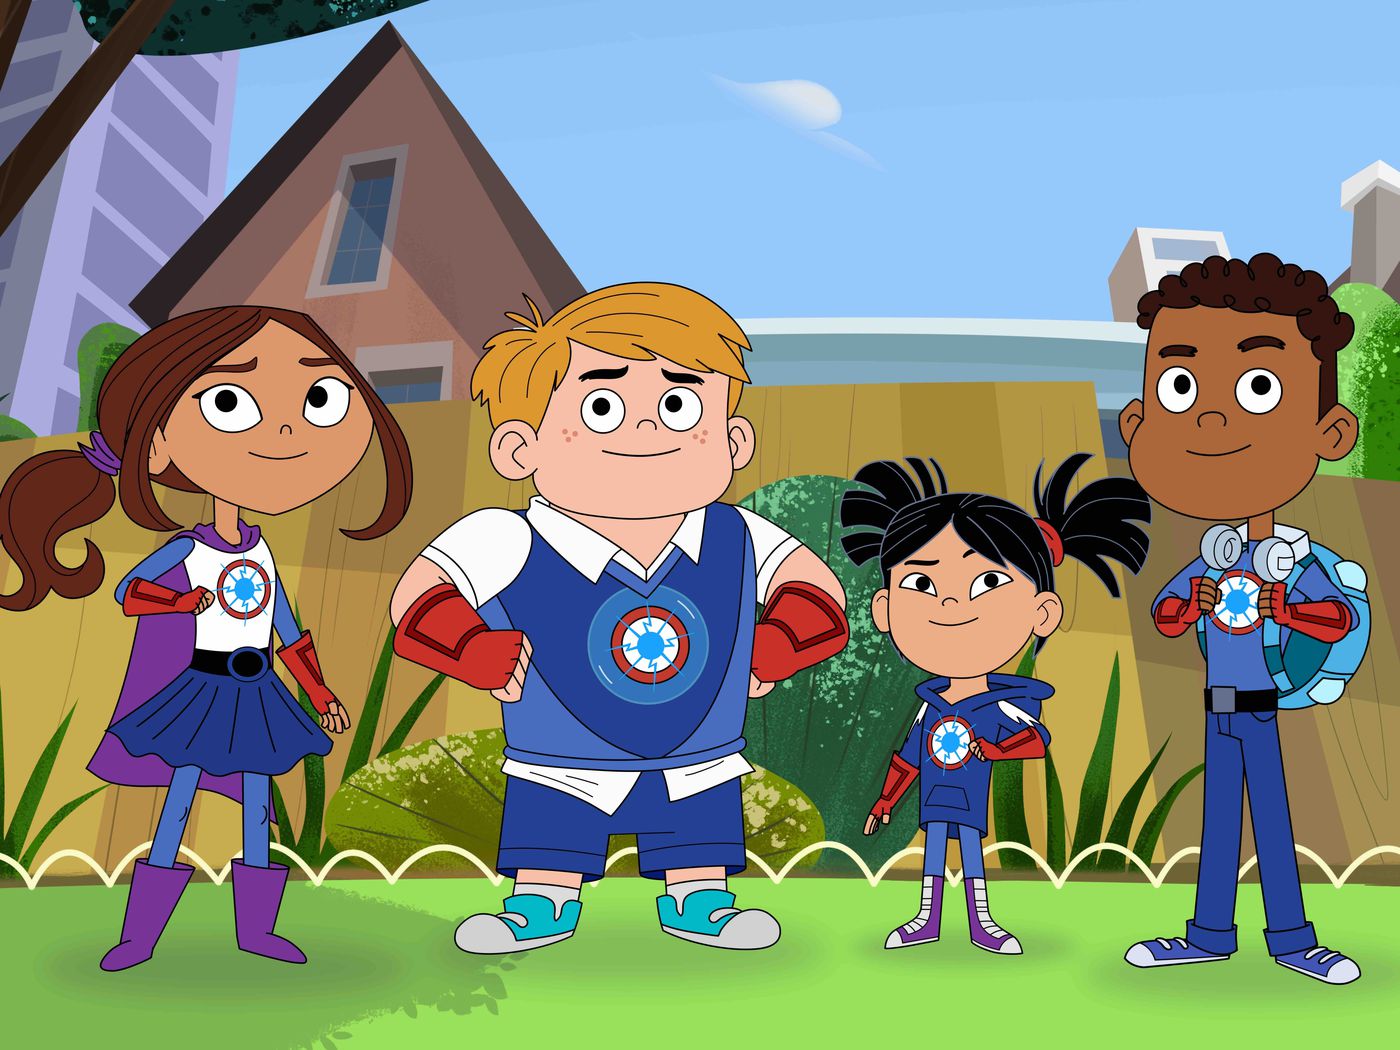 Superhero With Autism Among The Characters In New PBS Kids' Series Sun Times